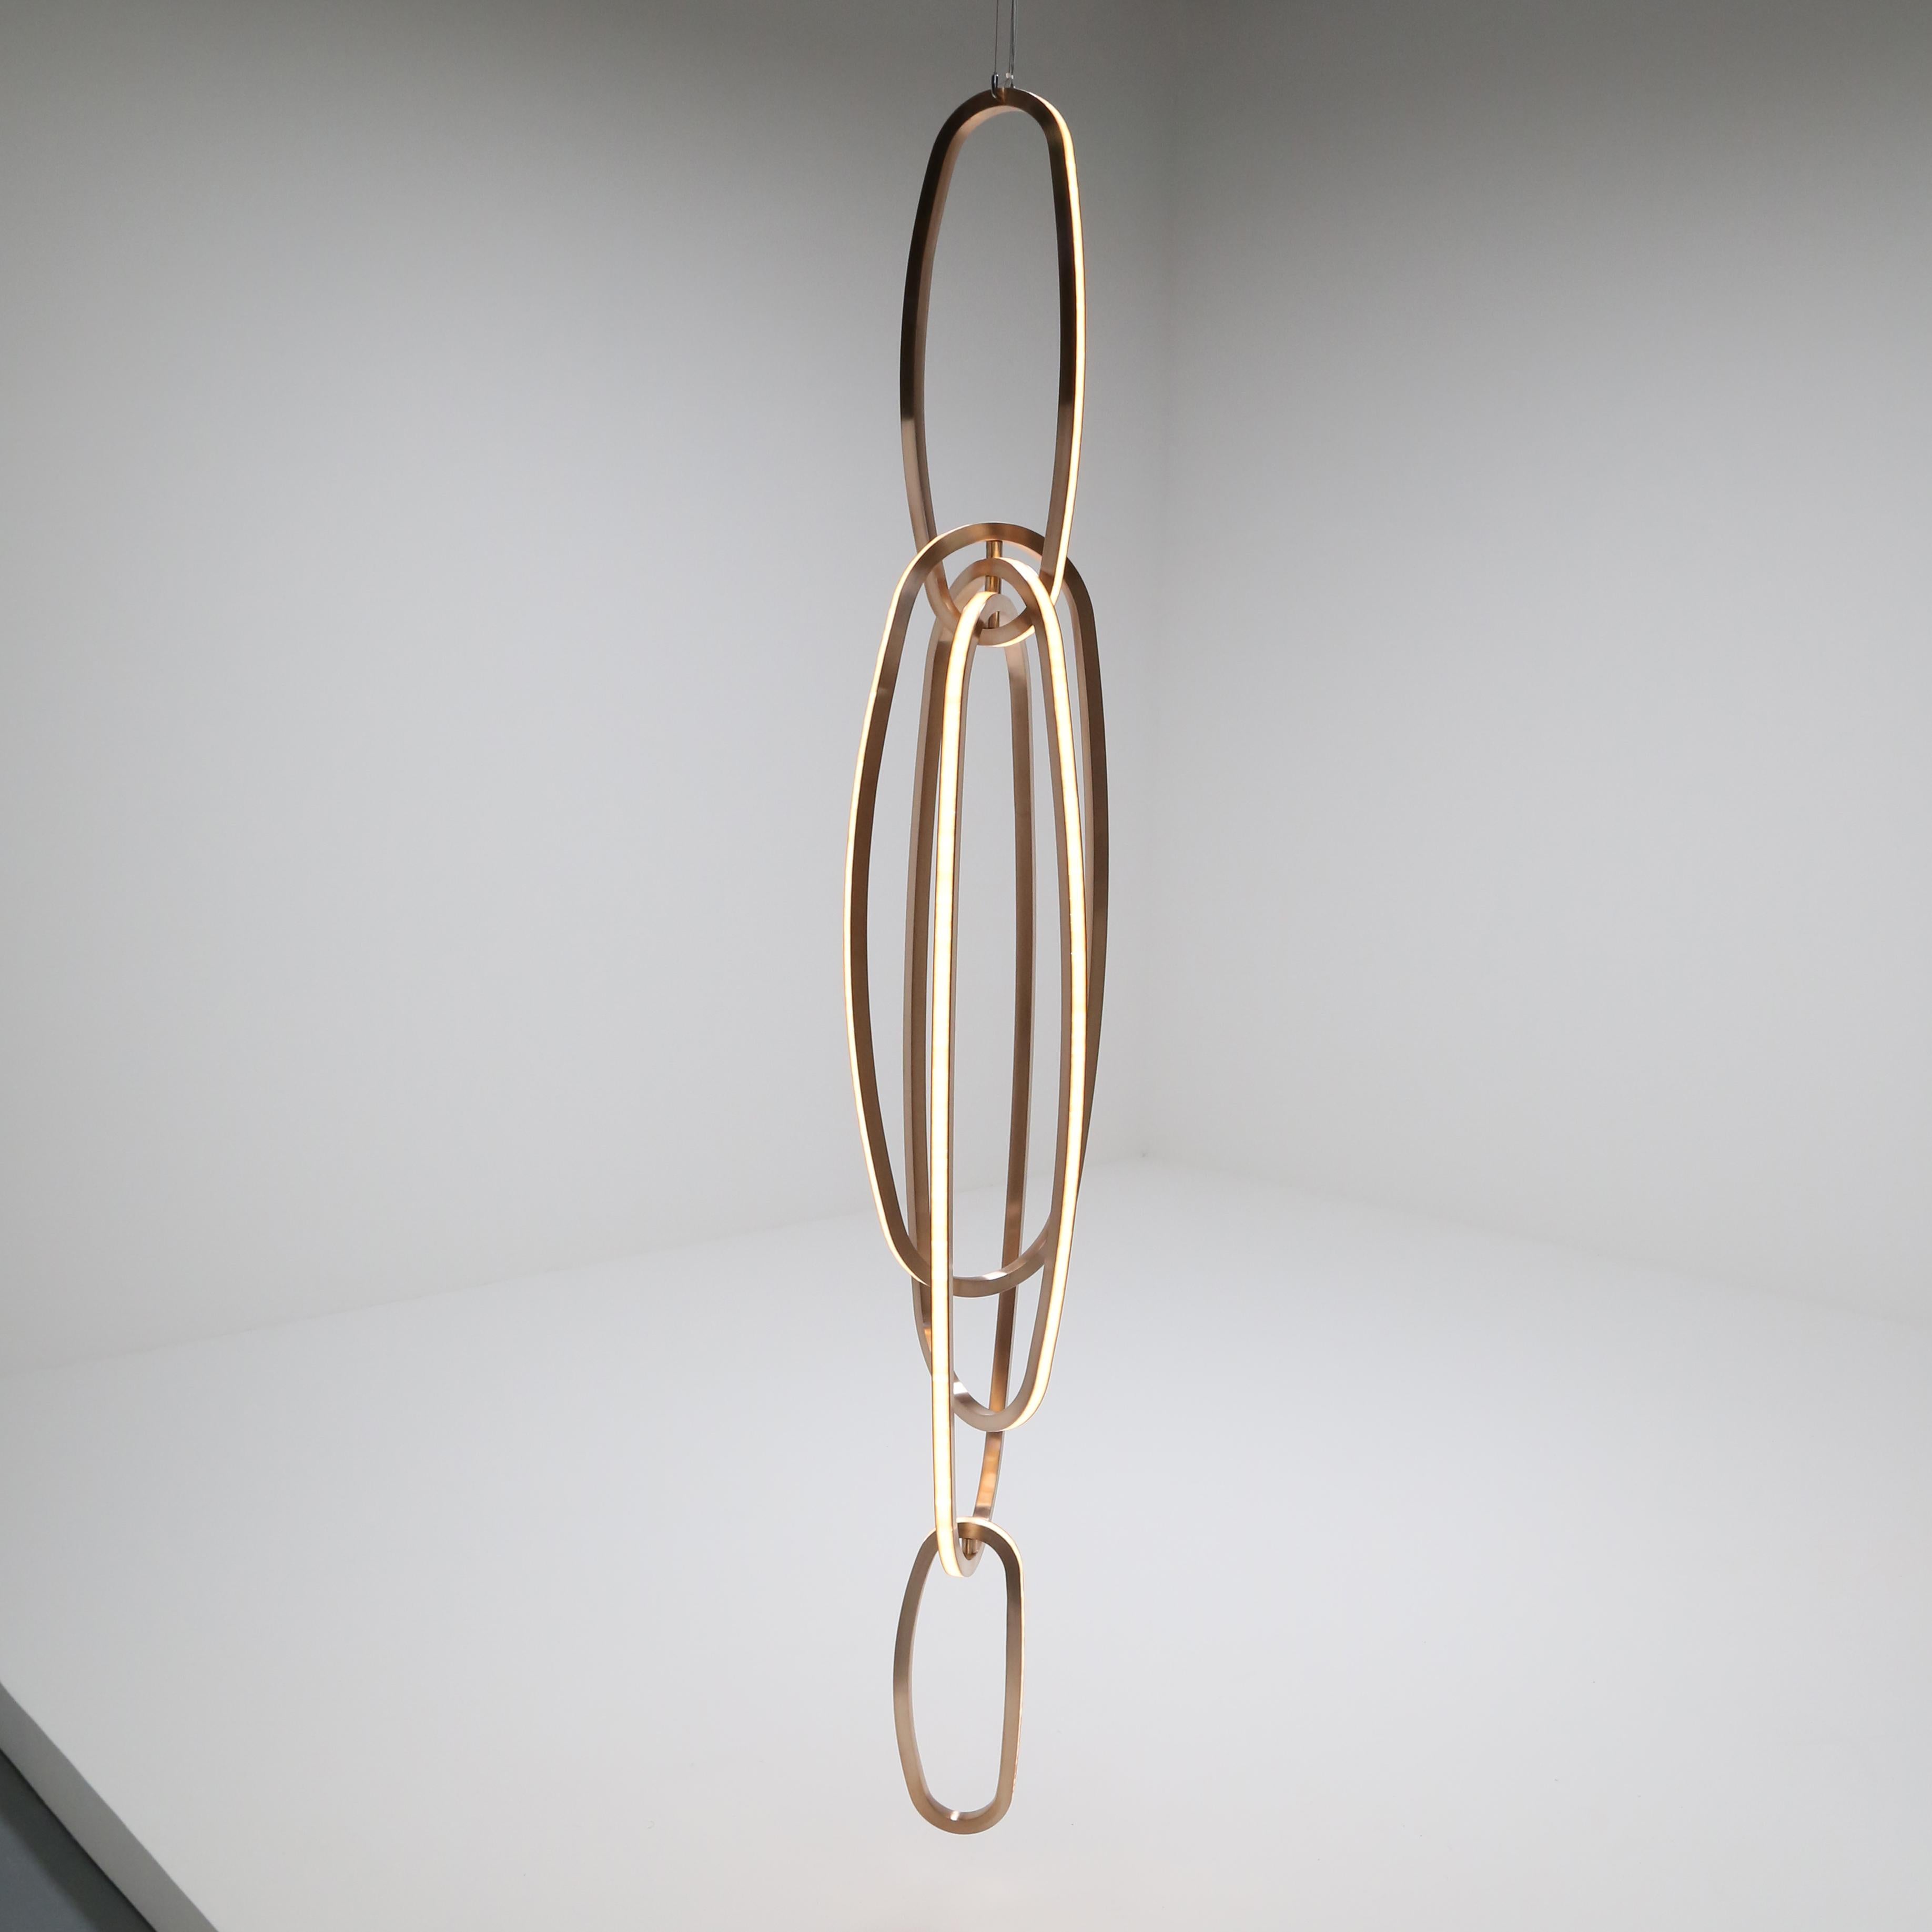 Fouette II, a hanging light sculpture in mirror polished bronze, glass, and LED, is arranged in Barry’s signature composition of interconnected ellipses in this case, uniform in shape, and suggestive, together, of the ballet position from which they